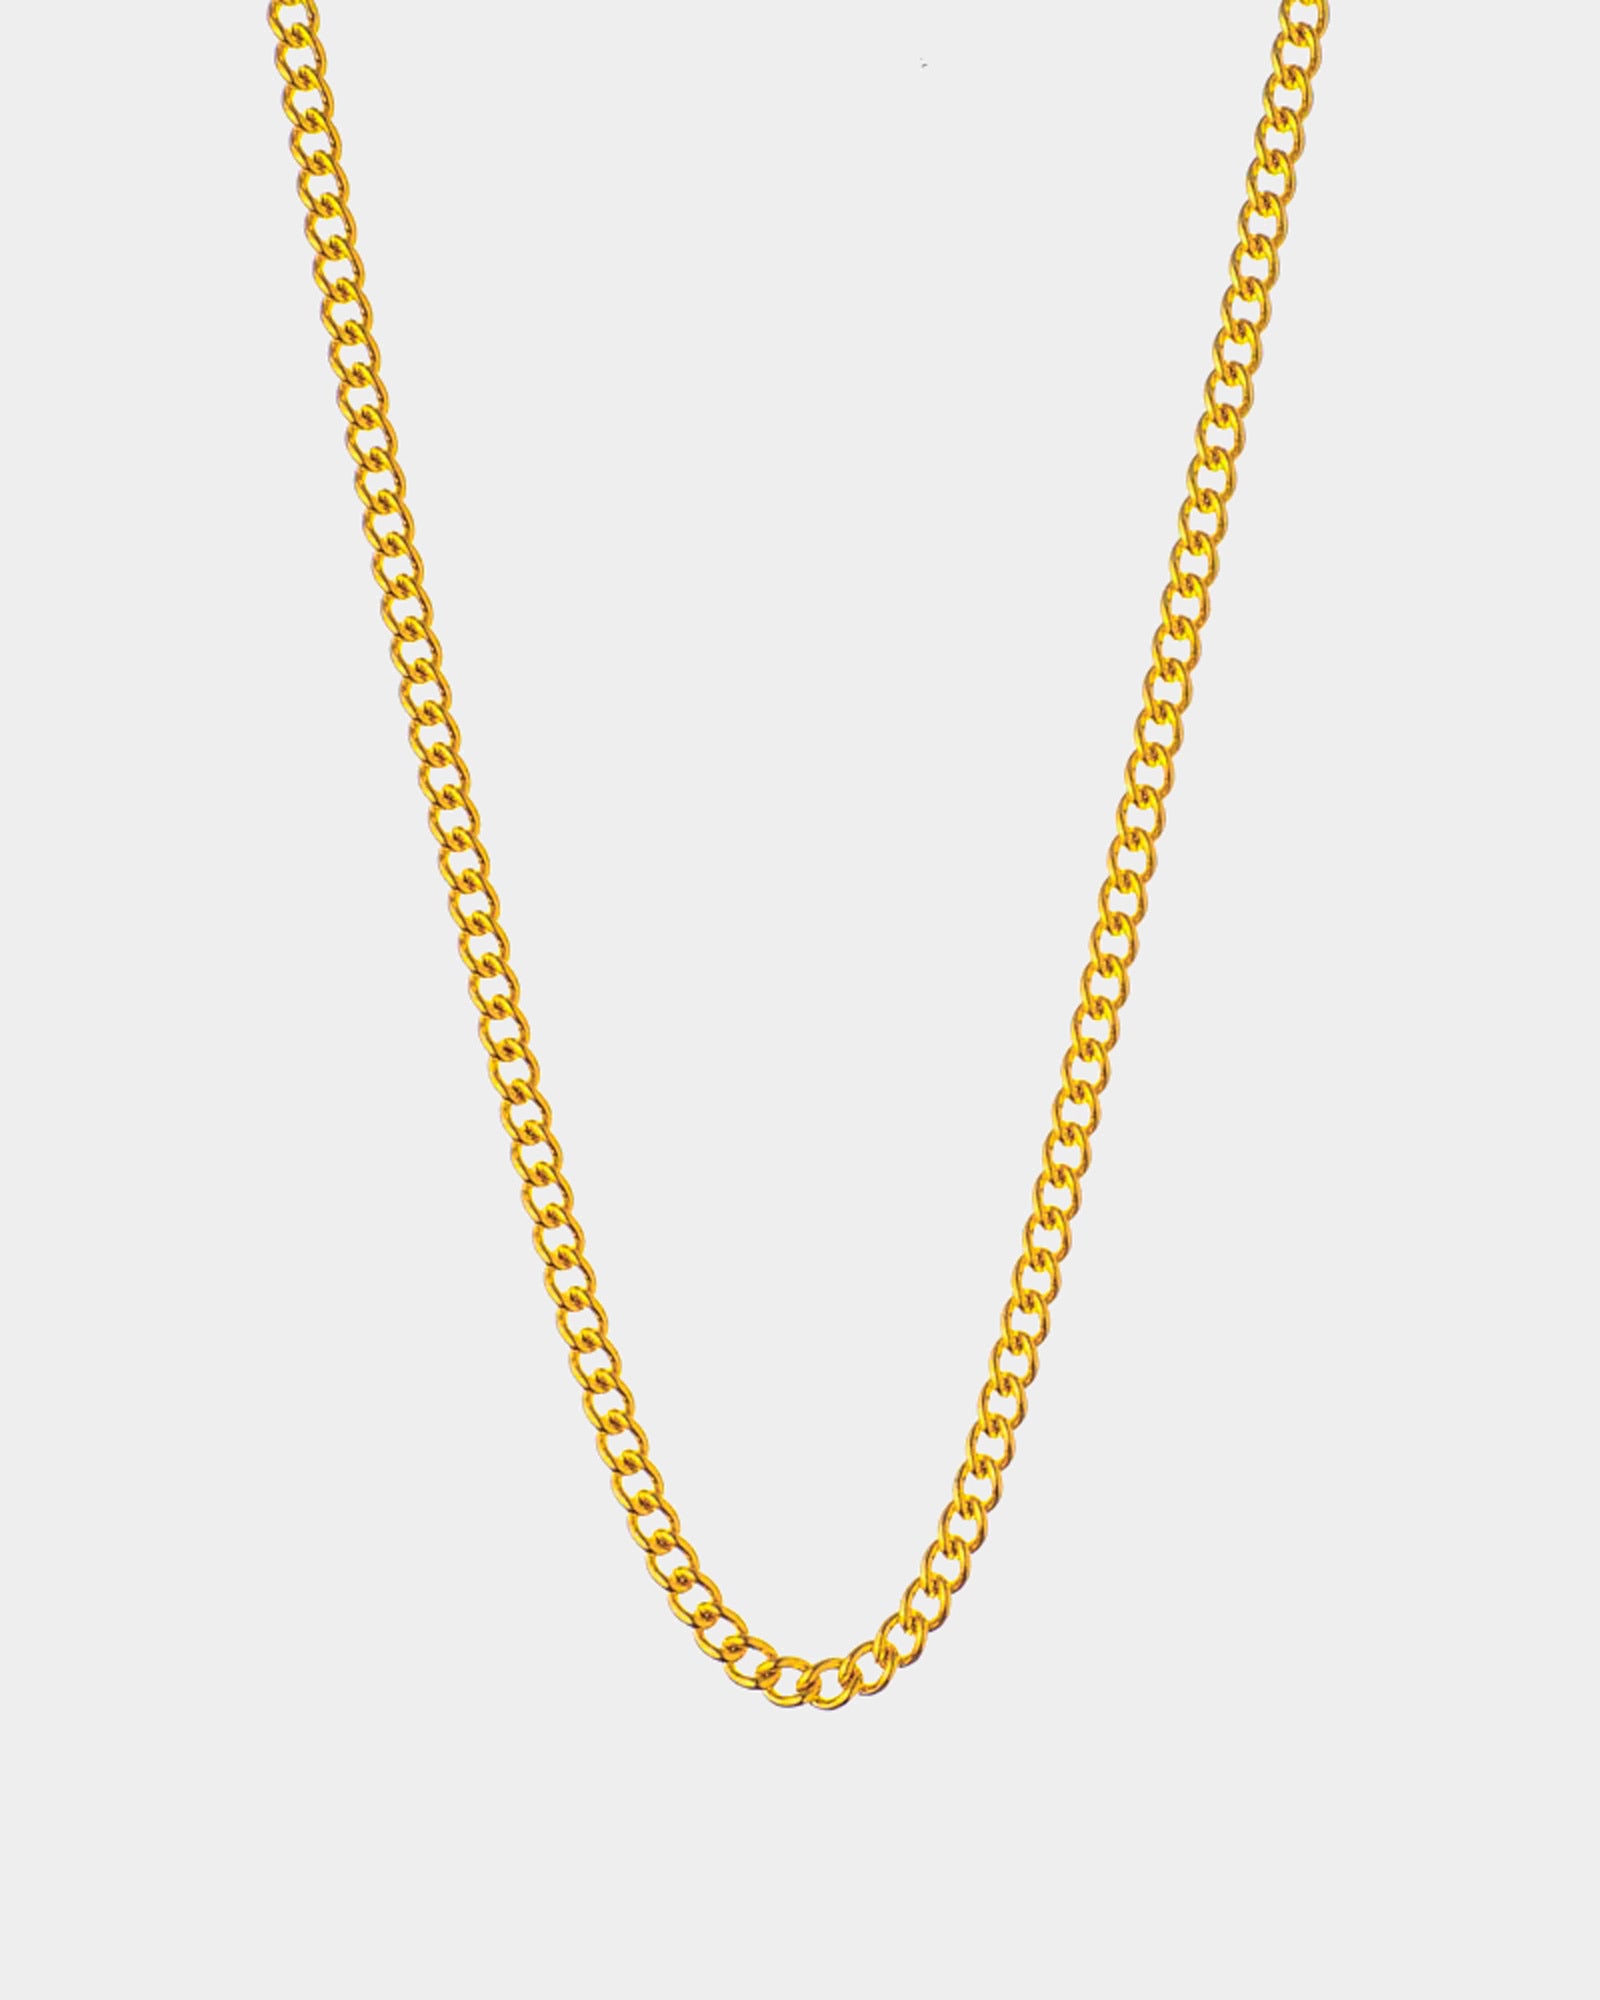 Milano - Golden Stainless Steel Necklace 'Milano' - Unissex Jewelry Online - Dicci